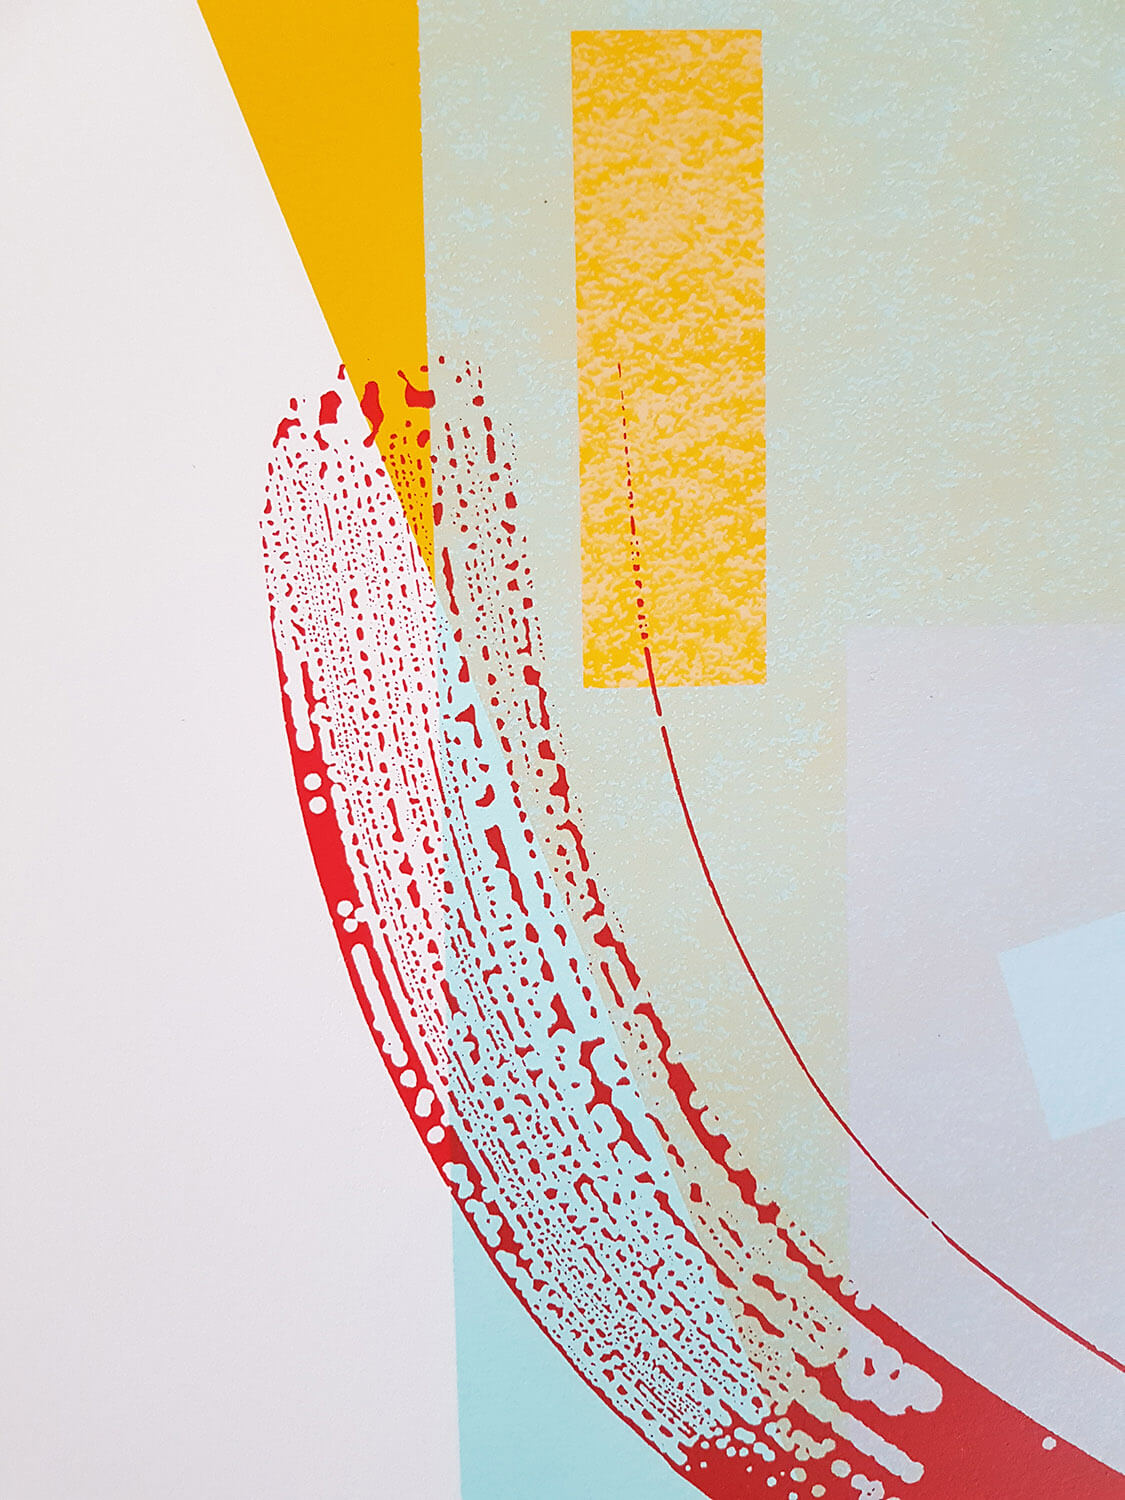 Abstract pop art screenprint in yellow & green, with red brushstroke effect, in a limited edition by Josie Blue Molloy